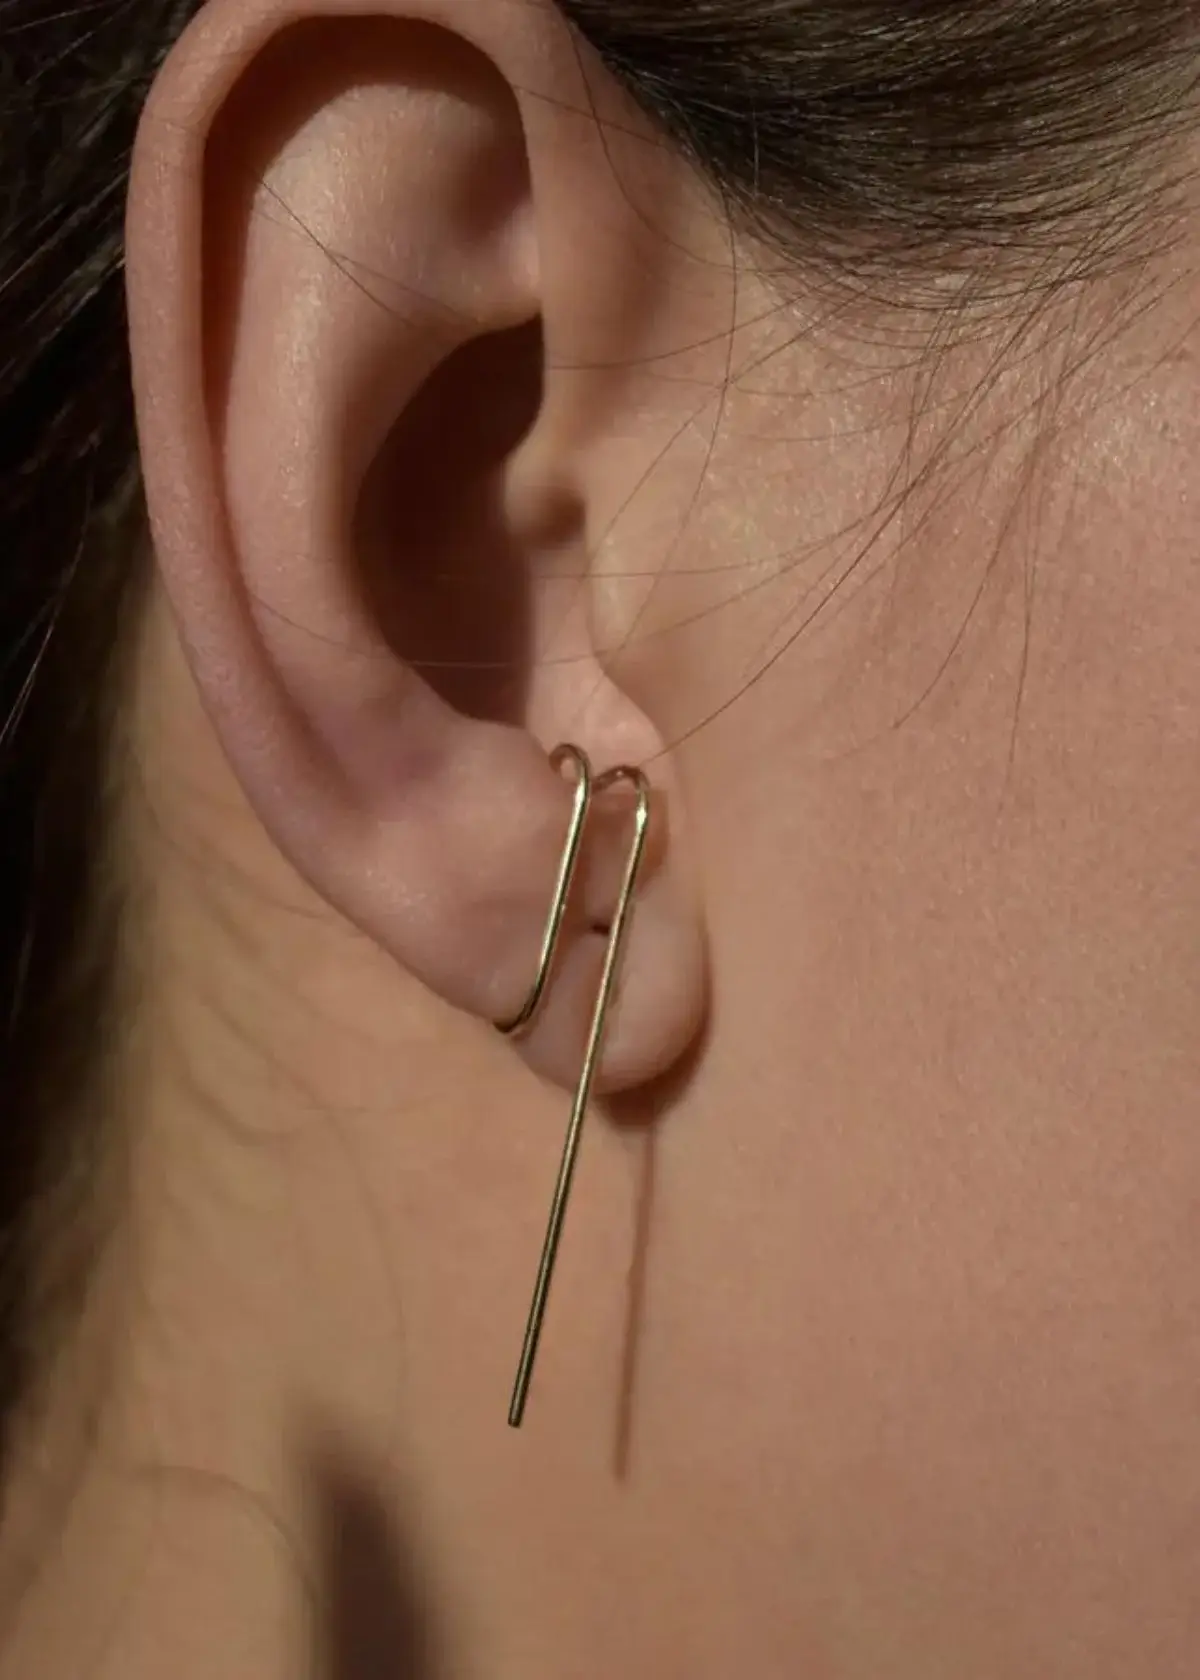 How can I Care for My Suspender Earrings to make them last longer?